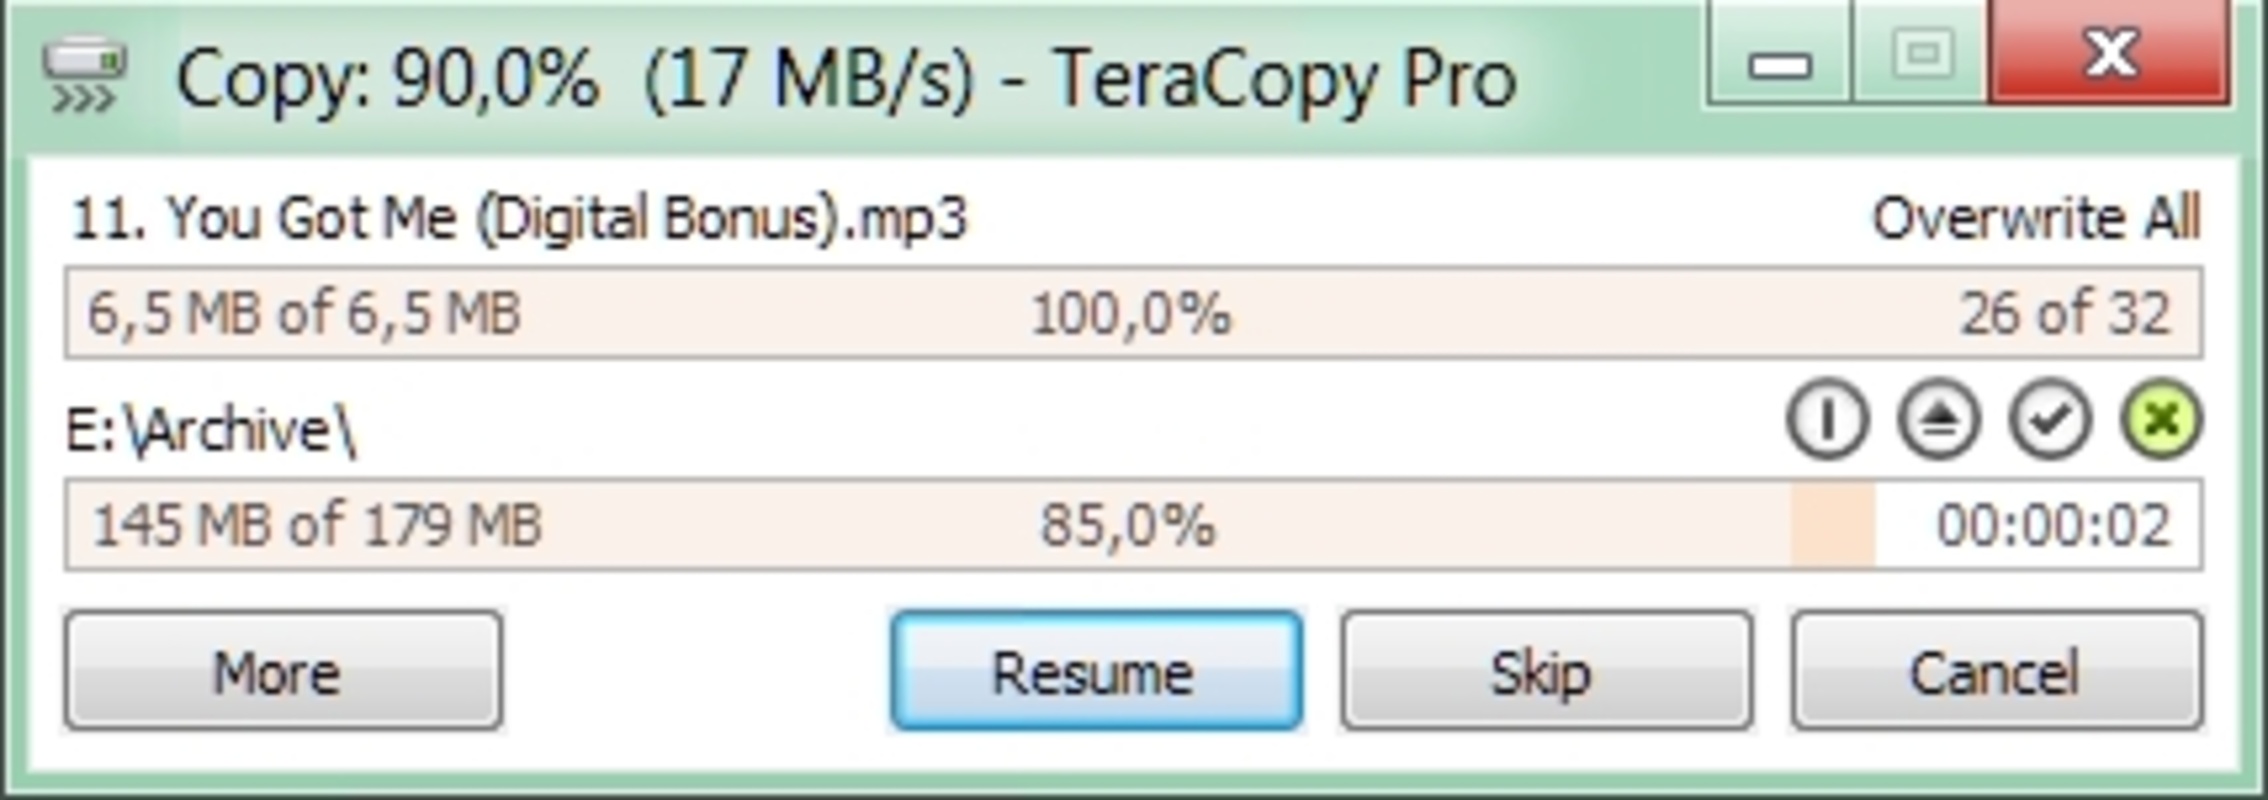 TeraCopy 3.17 feature